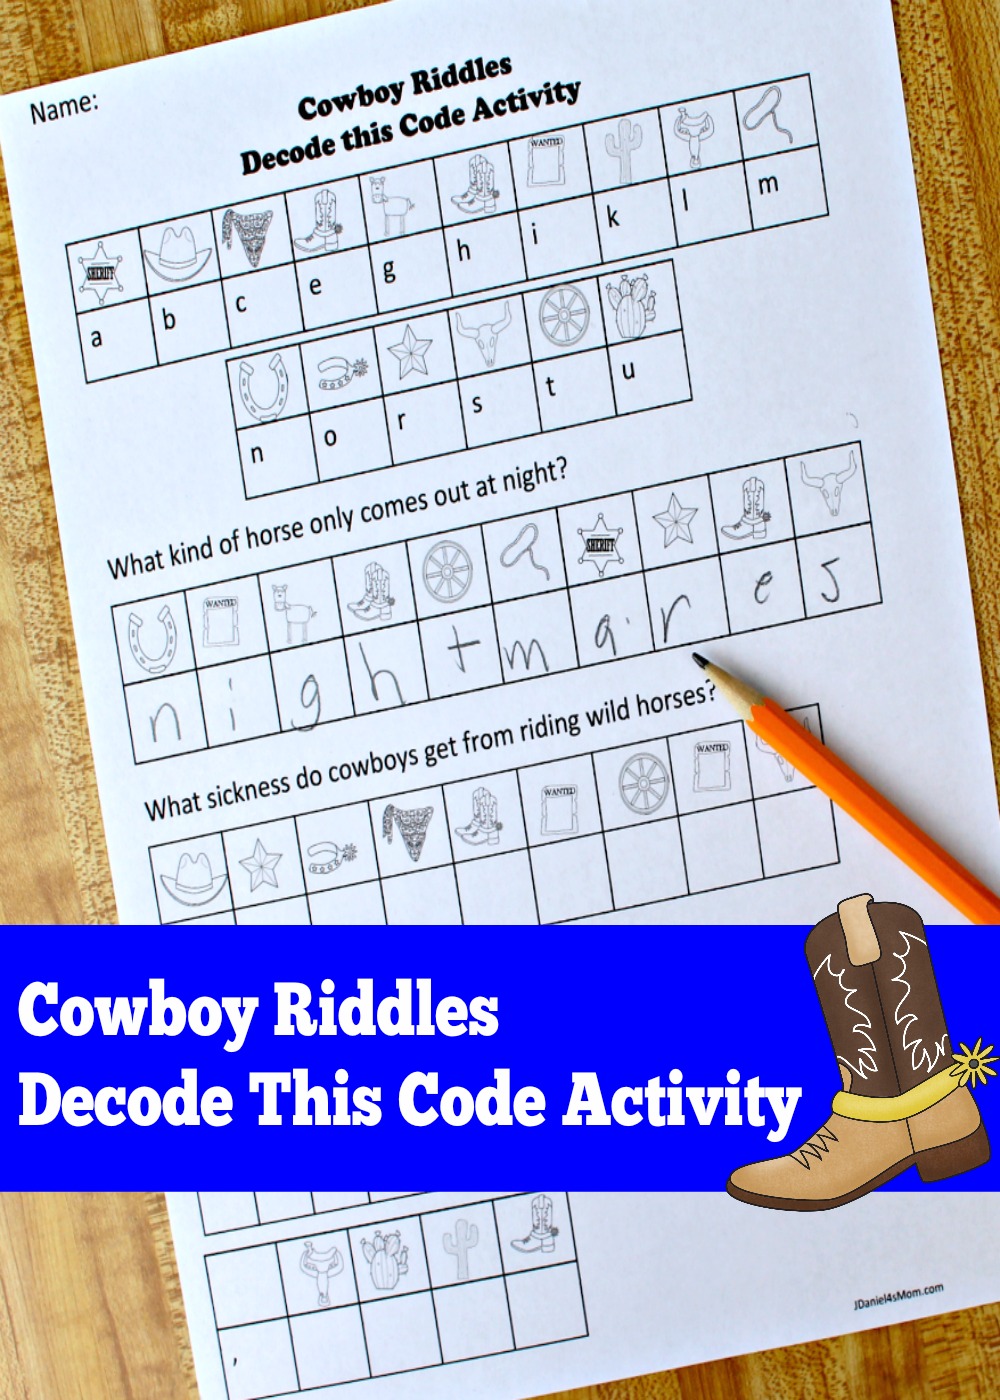 Your children at home and students at school will have fun discovering the punchlines to these cowboy riddles as they crack the code for each riddles punchline. This is also a fun reading activity. Children can explore reading with feeling and expression as they read each riddle to a partner or adult.